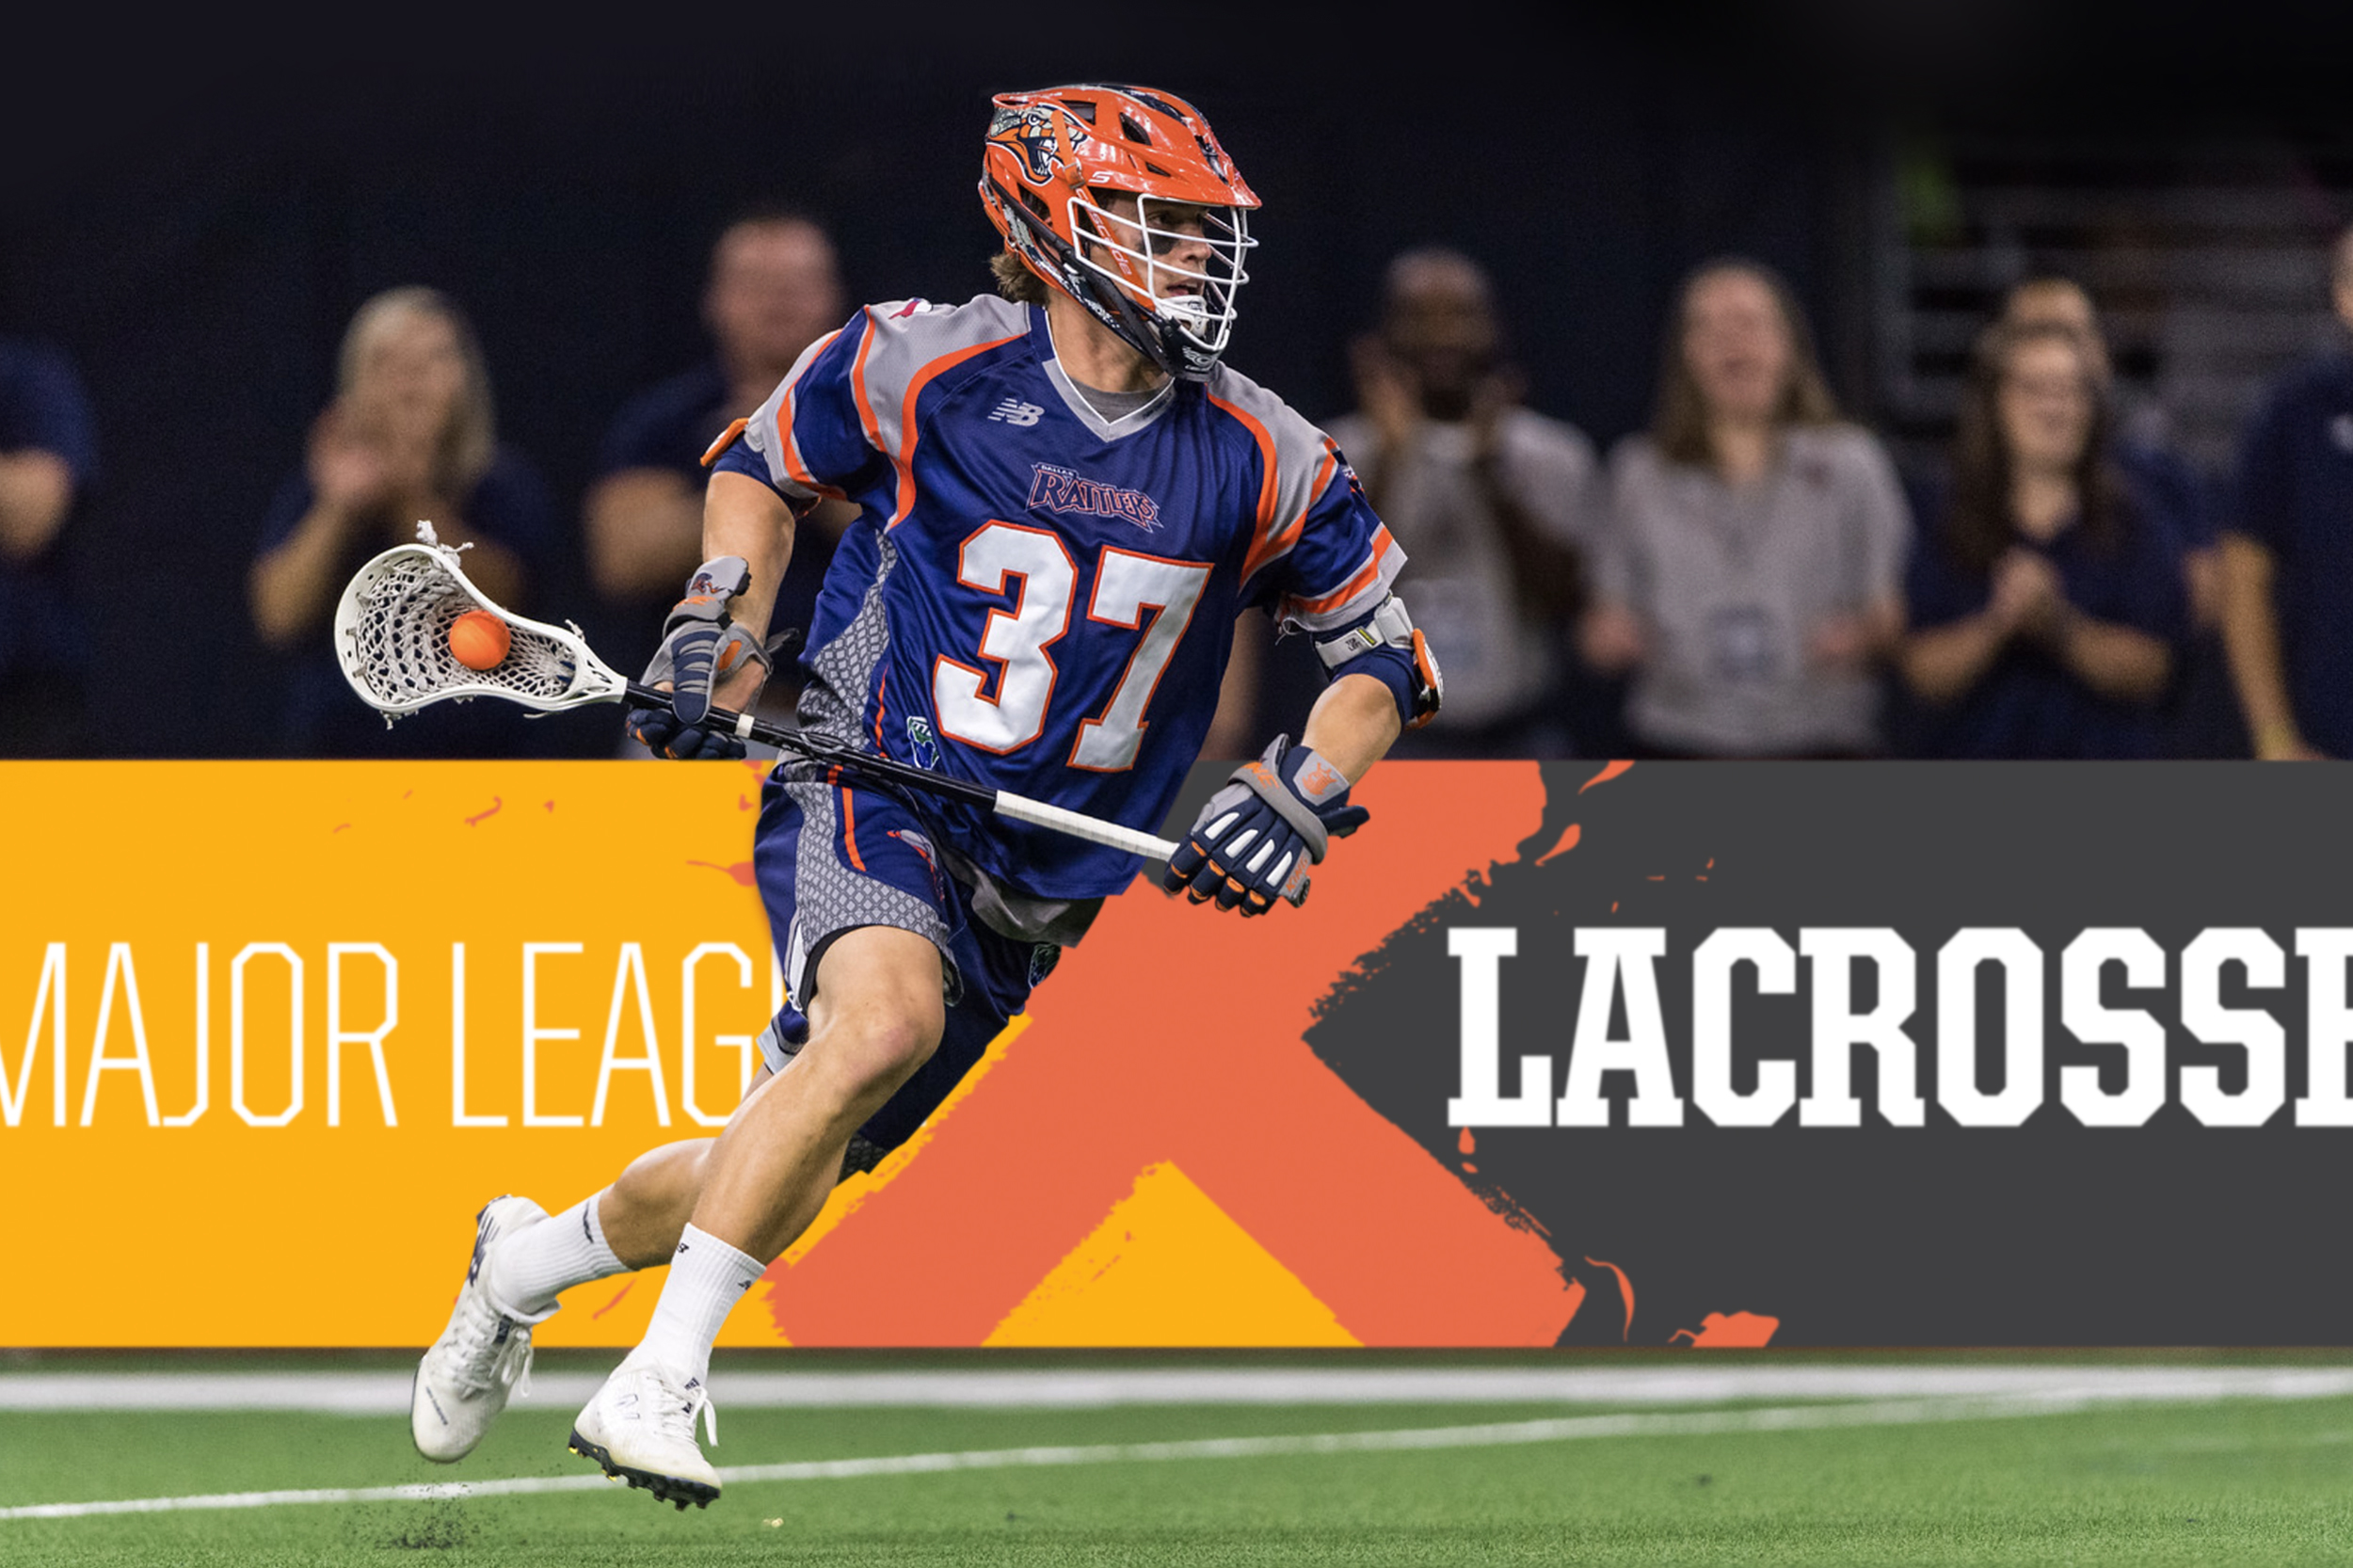 Major League Lacrosse - MLL - “Pat Spencer is playing at an MLL